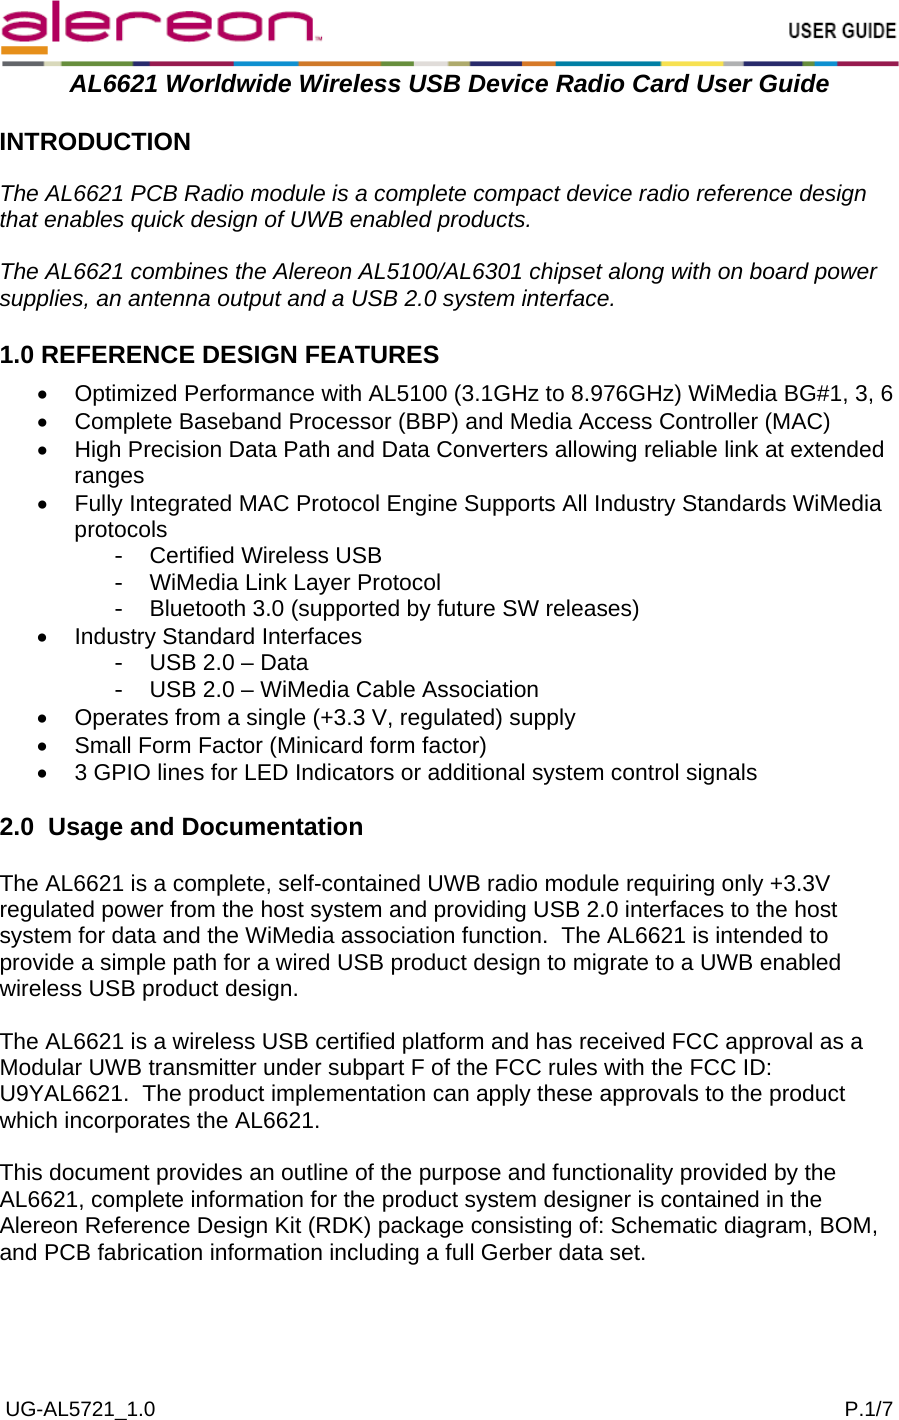  UG-AL5721_1.0                                                                                                                       P.1/7  AL6621 Worldwide Wireless USB Device Radio Card User Guide  INTRODUCTION  The AL6621 PCB Radio module is a complete compact device radio reference design that enables quick design of UWB enabled products.  The AL6621 combines the Alereon AL5100/AL6301 chipset along with on board power supplies, an antenna output and a USB 2.0 system interface.  1.0 REFERENCE DESIGN FEATURES  •  Optimized Performance with AL5100 (3.1GHz to 8.976GHz) WiMedia BG#1, 3, 6 •  Complete Baseband Processor (BBP) and Media Access Controller (MAC) •  High Precision Data Path and Data Converters allowing reliable link at extended ranges •  Fully Integrated MAC Protocol Engine Supports All Industry Standards WiMedia protocols -  Certified Wireless USB -  WiMedia Link Layer Protocol -  Bluetooth 3.0 (supported by future SW releases) •  Industry Standard Interfaces -  USB 2.0 – Data -  USB 2.0 – WiMedia Cable Association •  Operates from a single (+3.3 V, regulated) supply •  Small Form Factor (Minicard form factor) •  3 GPIO lines for LED Indicators or additional system control signals  2.0  Usage and Documentation  The AL6621 is a complete, self-contained UWB radio module requiring only +3.3V regulated power from the host system and providing USB 2.0 interfaces to the host system for data and the WiMedia association function.  The AL6621 is intended to provide a simple path for a wired USB product design to migrate to a UWB enabled wireless USB product design.  The AL6621 is a wireless USB certified platform and has received FCC approval as a Modular UWB transmitter under subpart F of the FCC rules with the FCC ID: U9YAL6621.  The product implementation can apply these approvals to the product which incorporates the AL6621.  This document provides an outline of the purpose and functionality provided by the AL6621, complete information for the product system designer is contained in the Alereon Reference Design Kit (RDK) package consisting of: Schematic diagram, BOM, and PCB fabrication information including a full Gerber data set.   